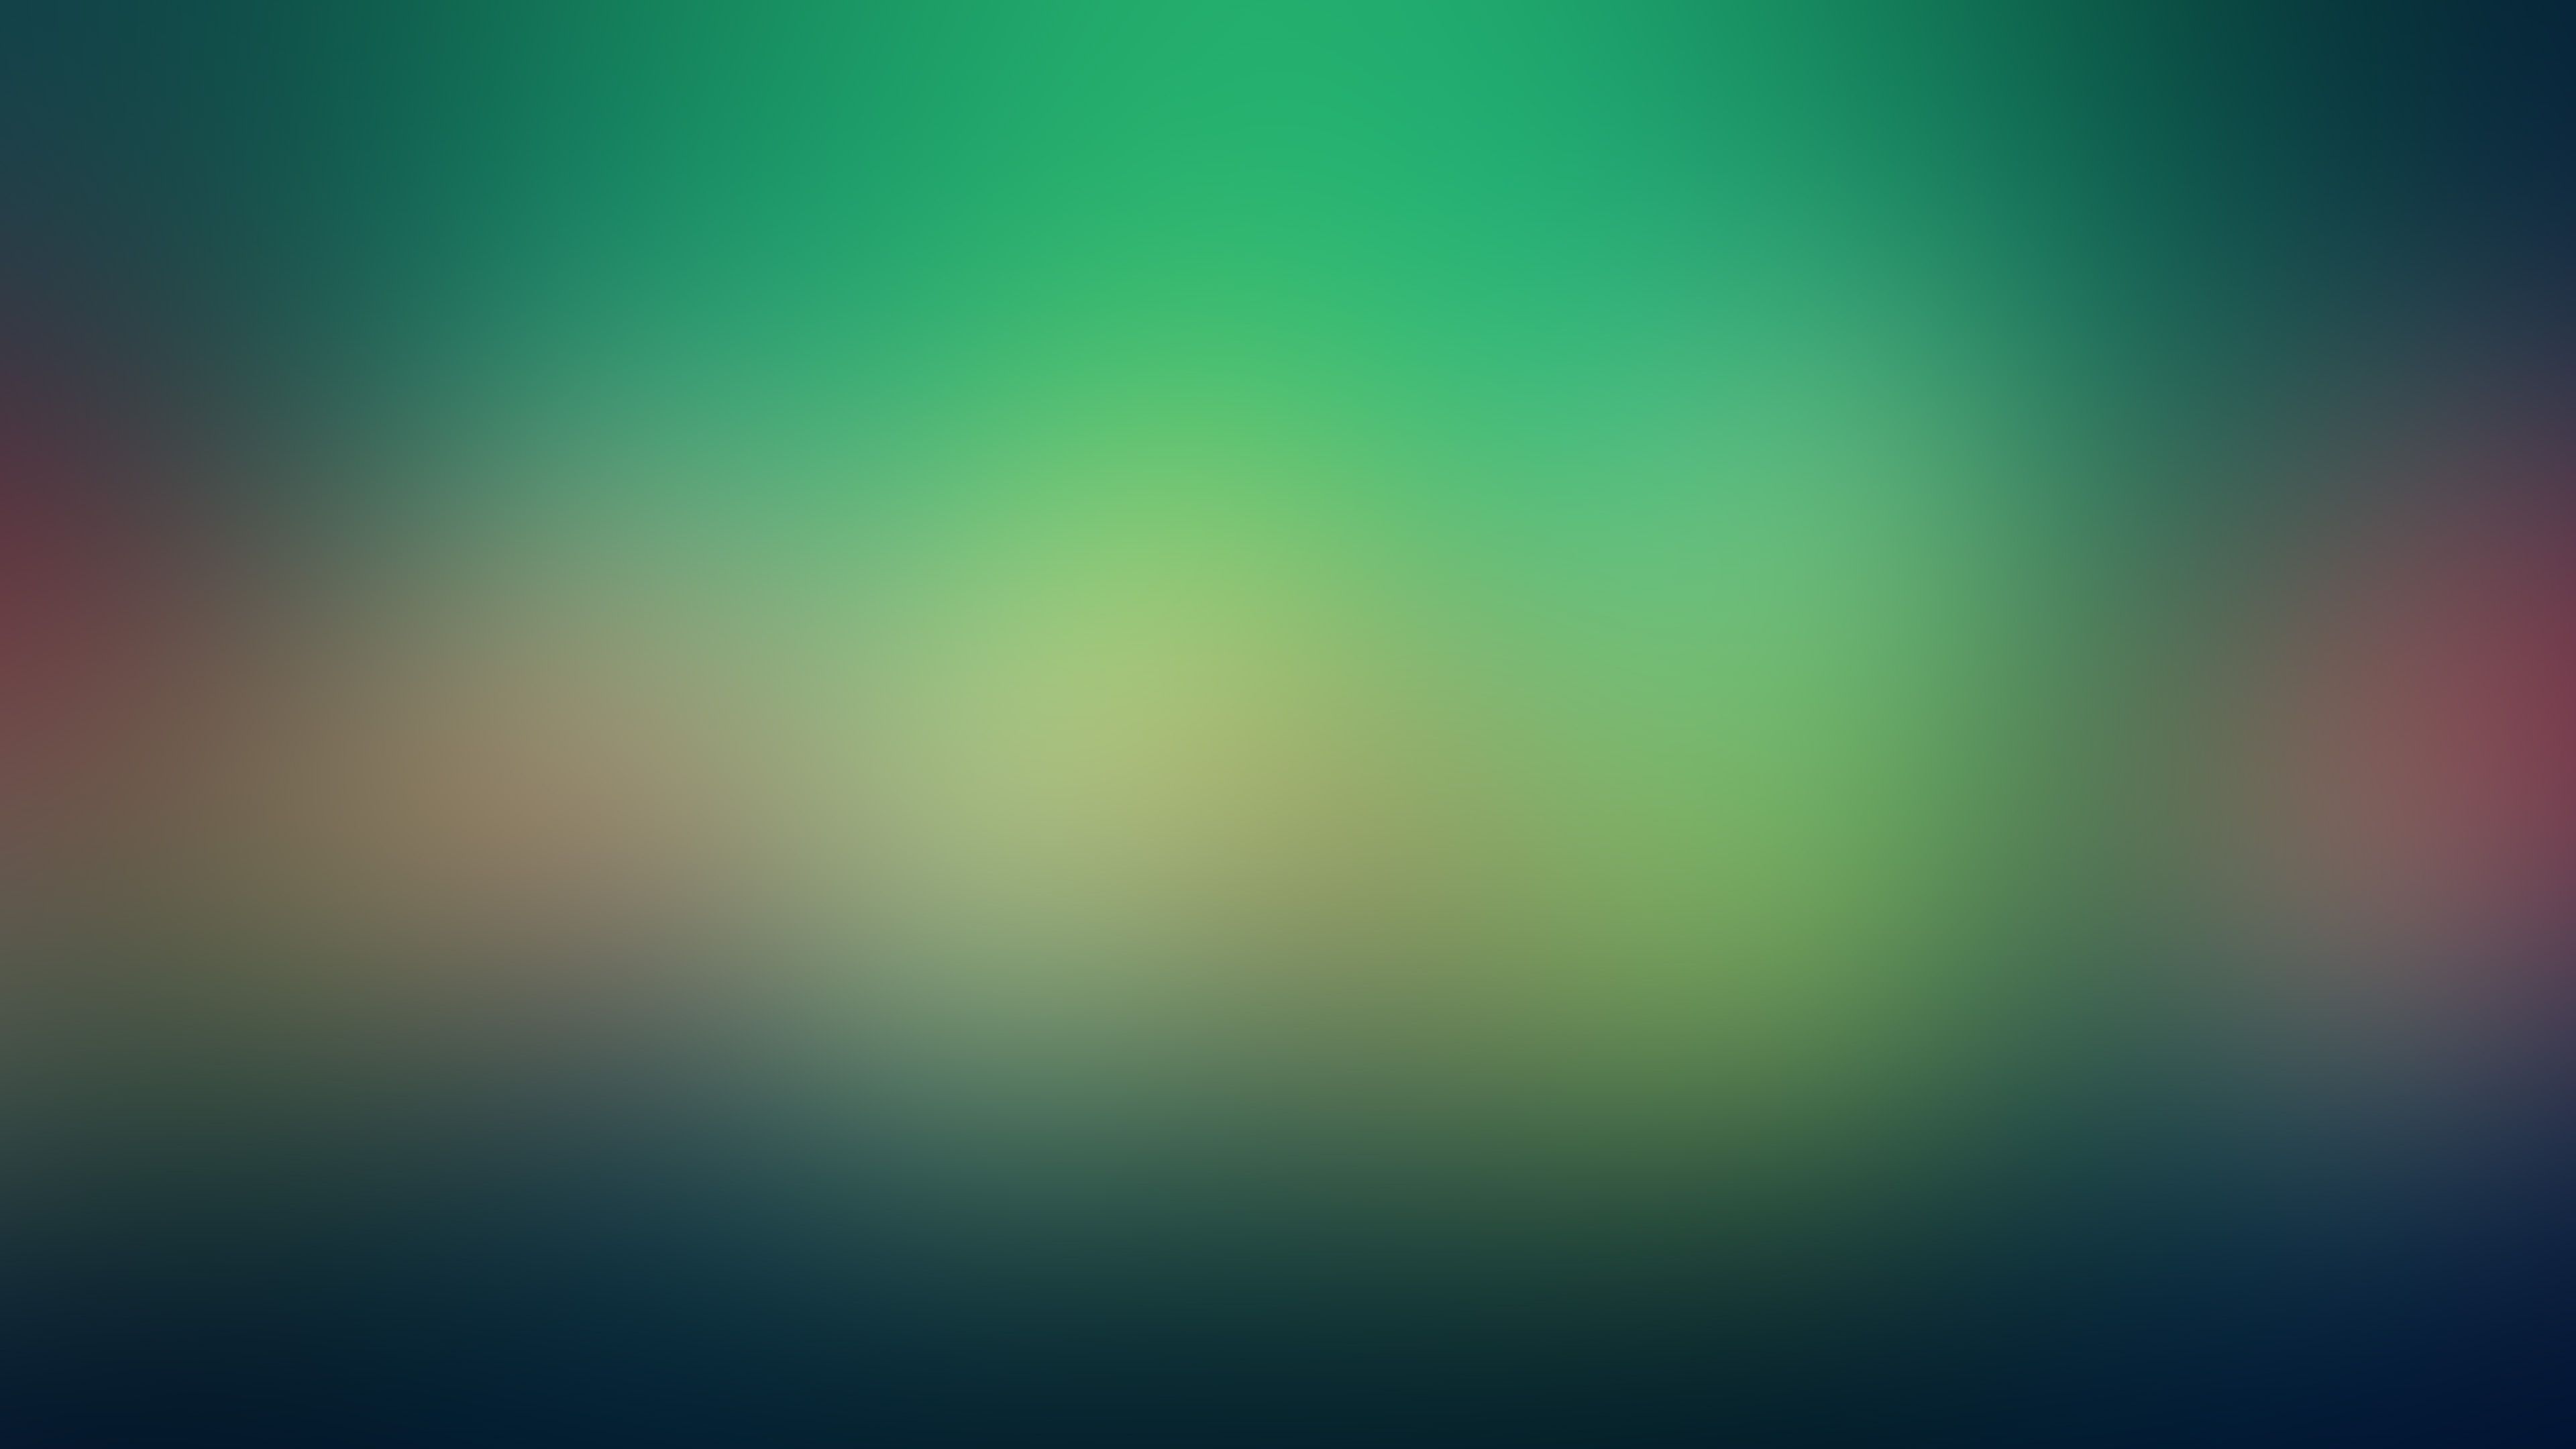 Abstract Colour Expression 4k Hd Wallpaper, Green Wallpaper, Wallpaper, Blur Wallpaper, Abstract Wal. Abstract Wallpaper, Green Wallpaper, Abstract